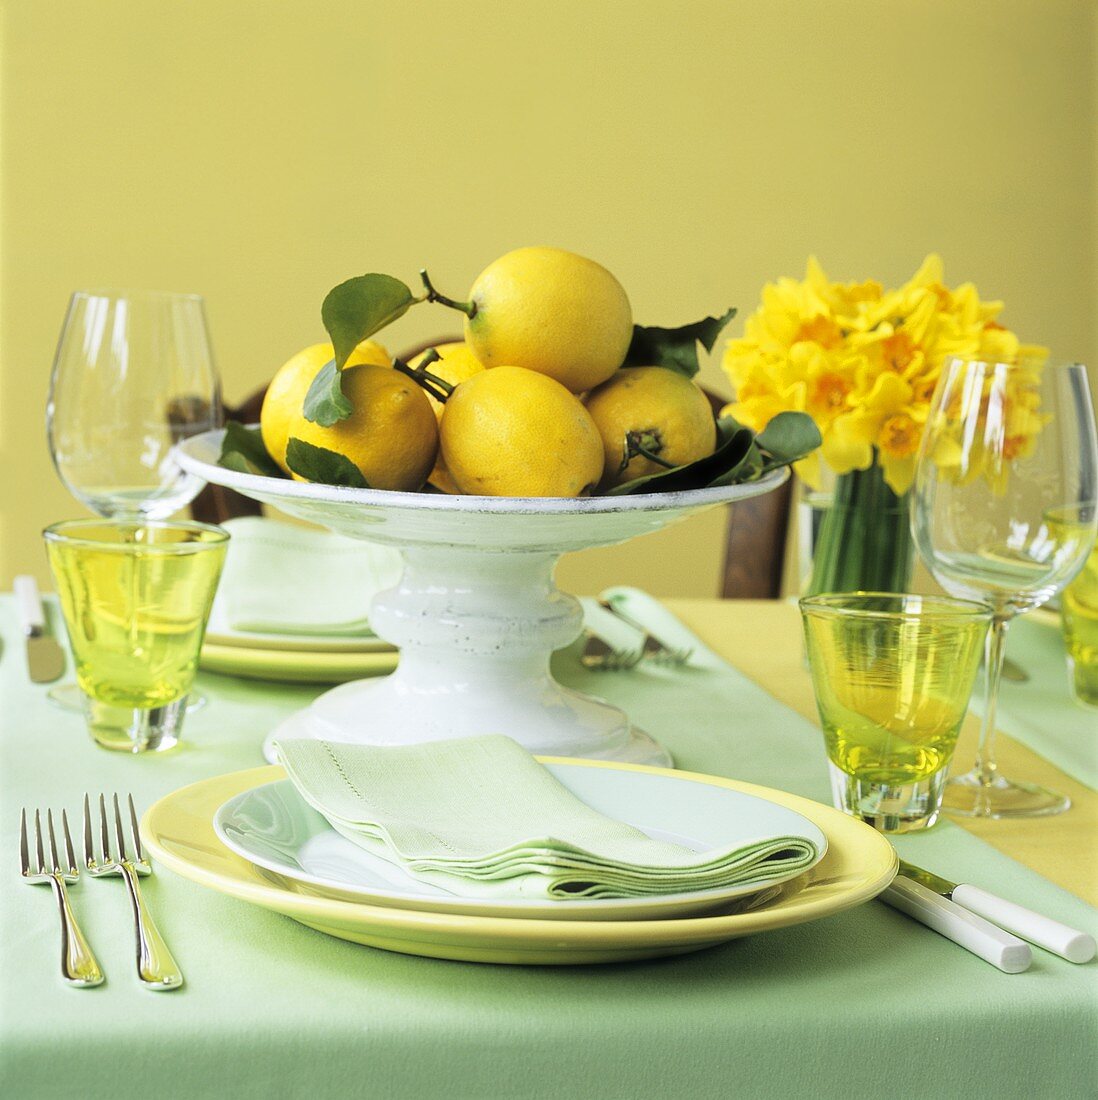 Bowl of lemons on table laid for two